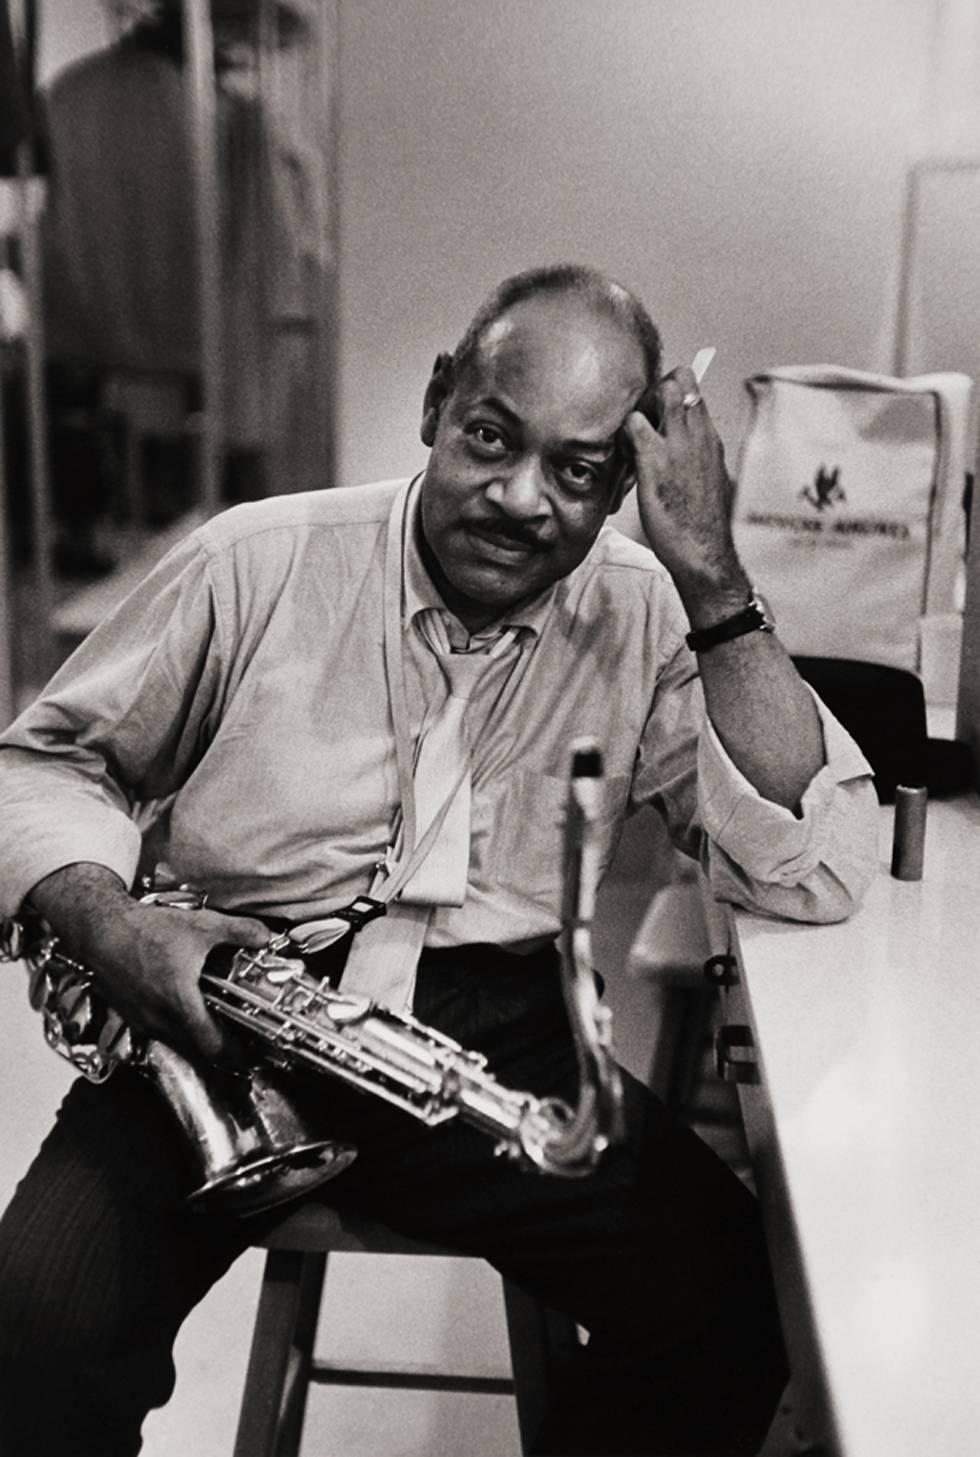 Black and White Photograph William Claxton - Coleman Hawkins